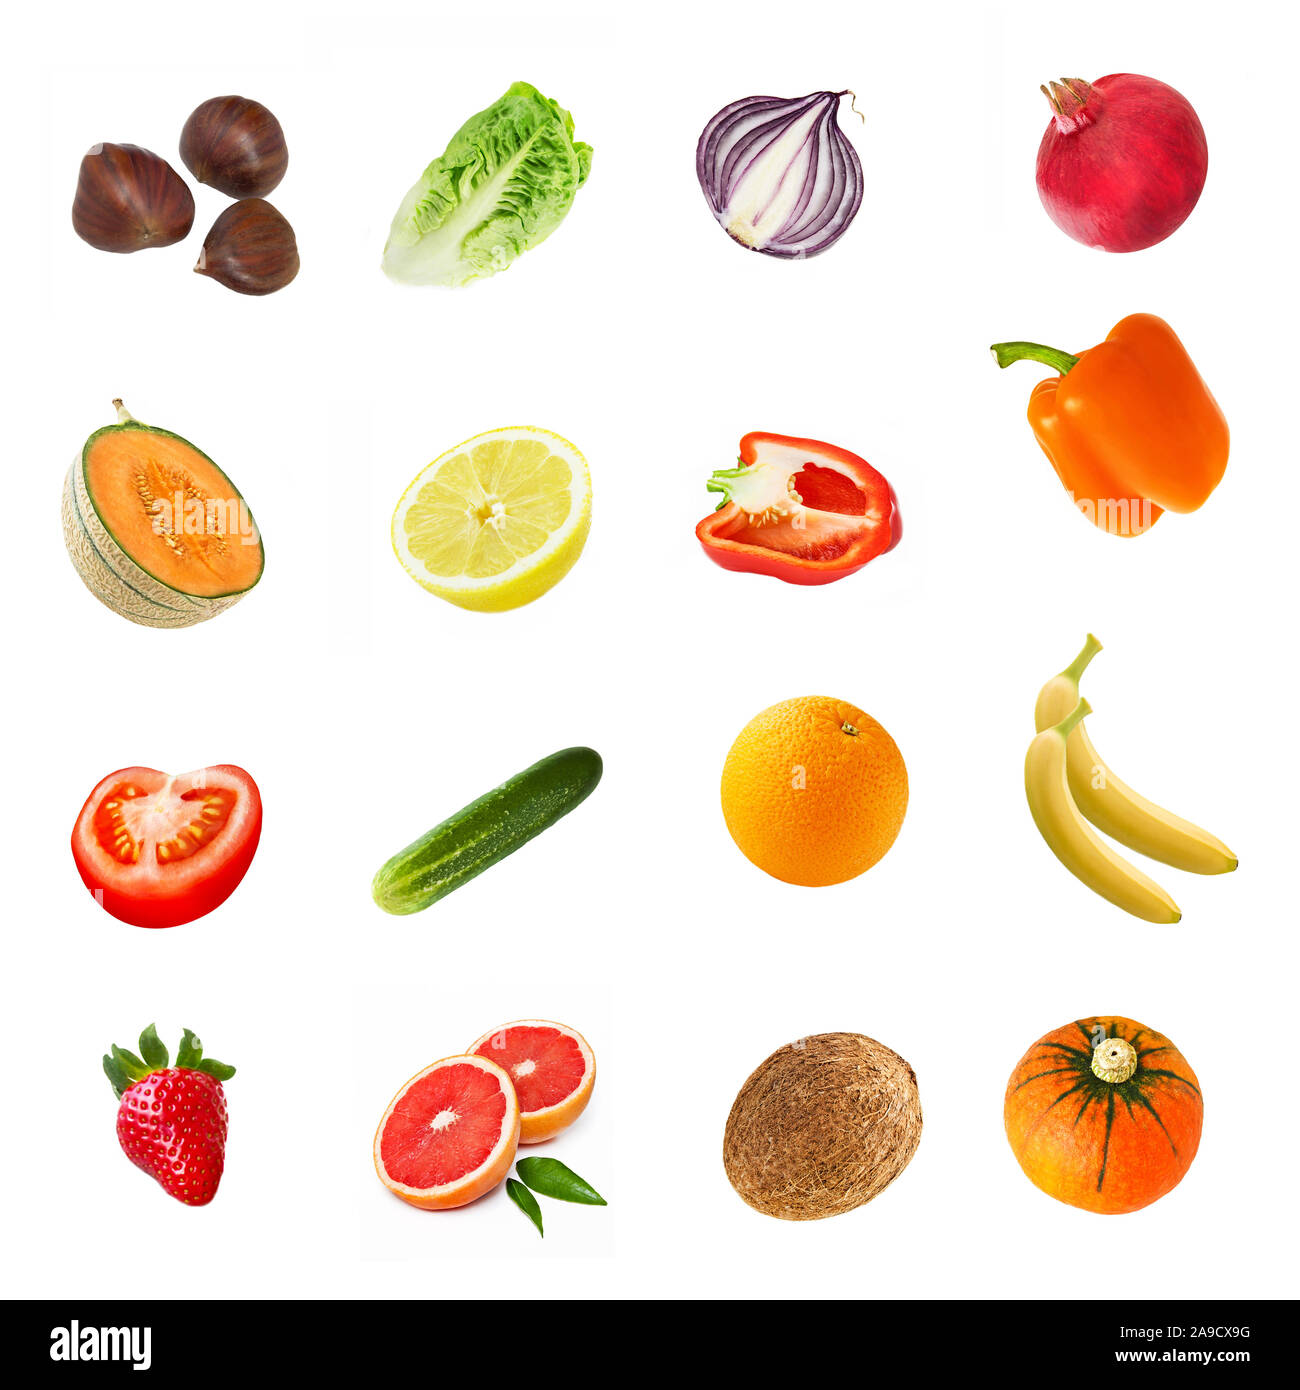 Fruits and vegetables isolated against white background Stock Photo